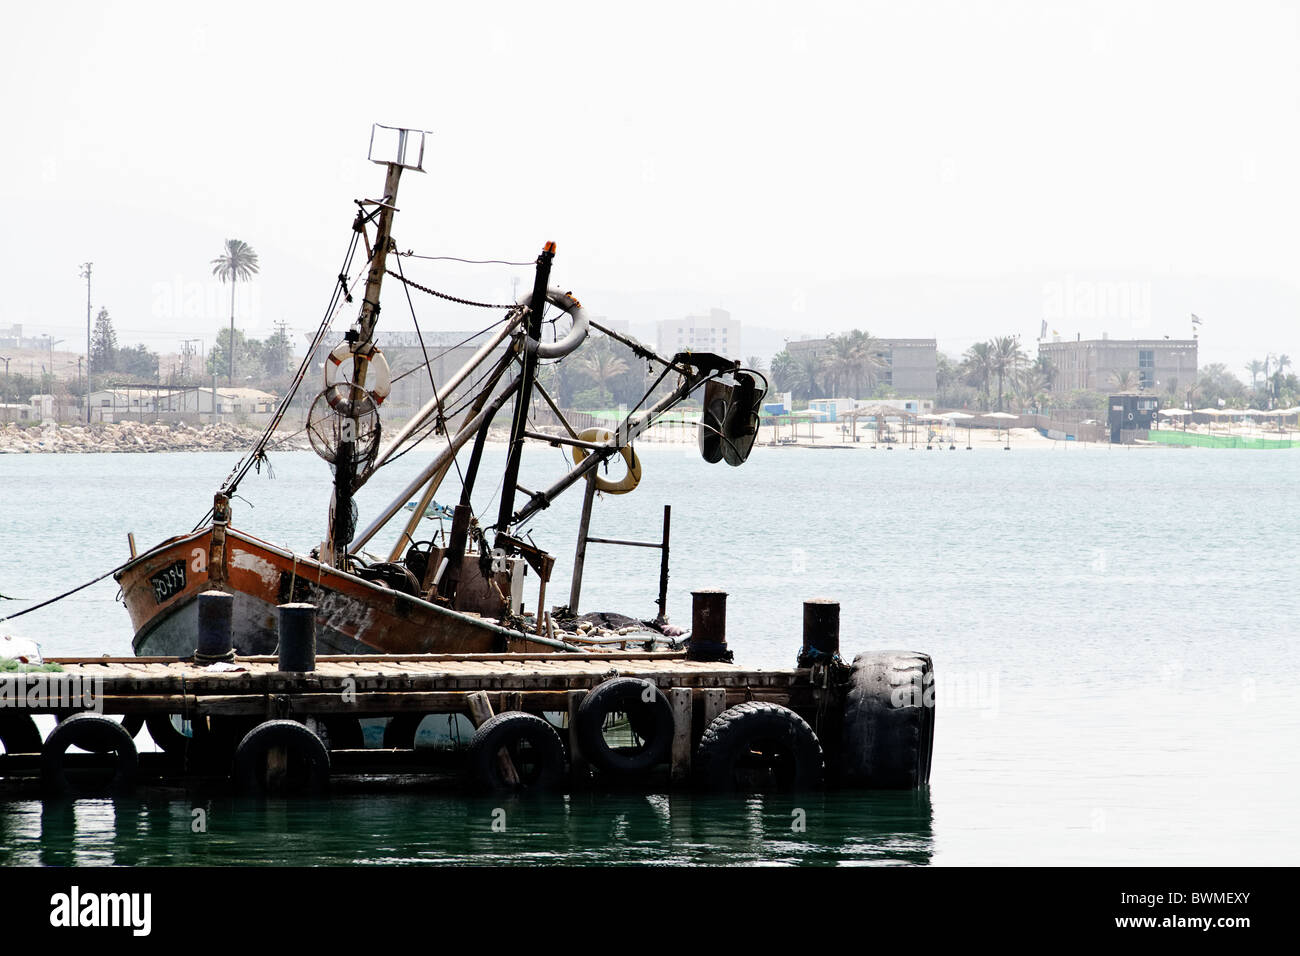 A boat in the port of of Akko or Acre in northern Israel Stock Photo